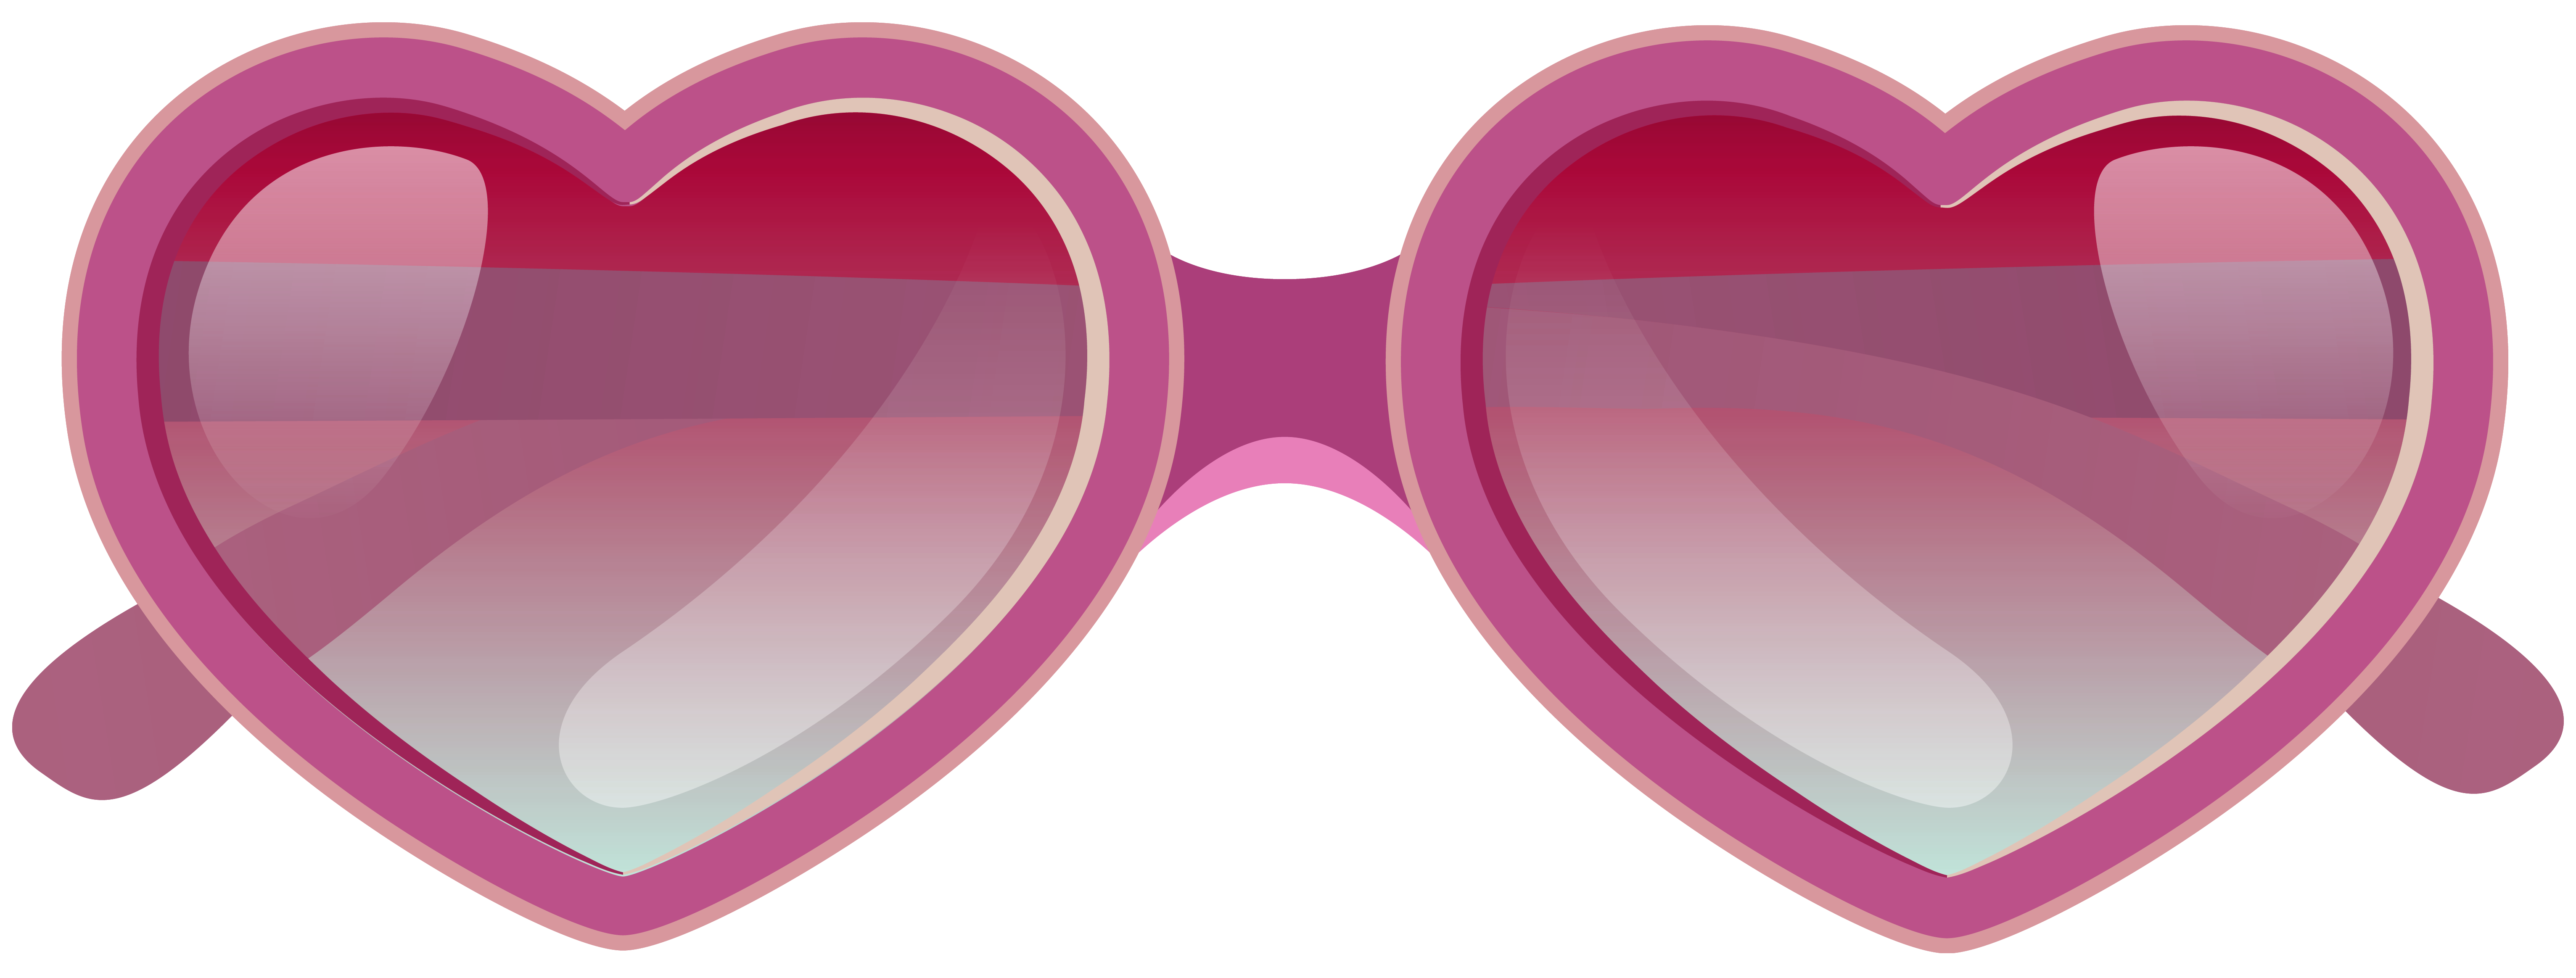 Heart sunglasses png image. Clipart glasses pink